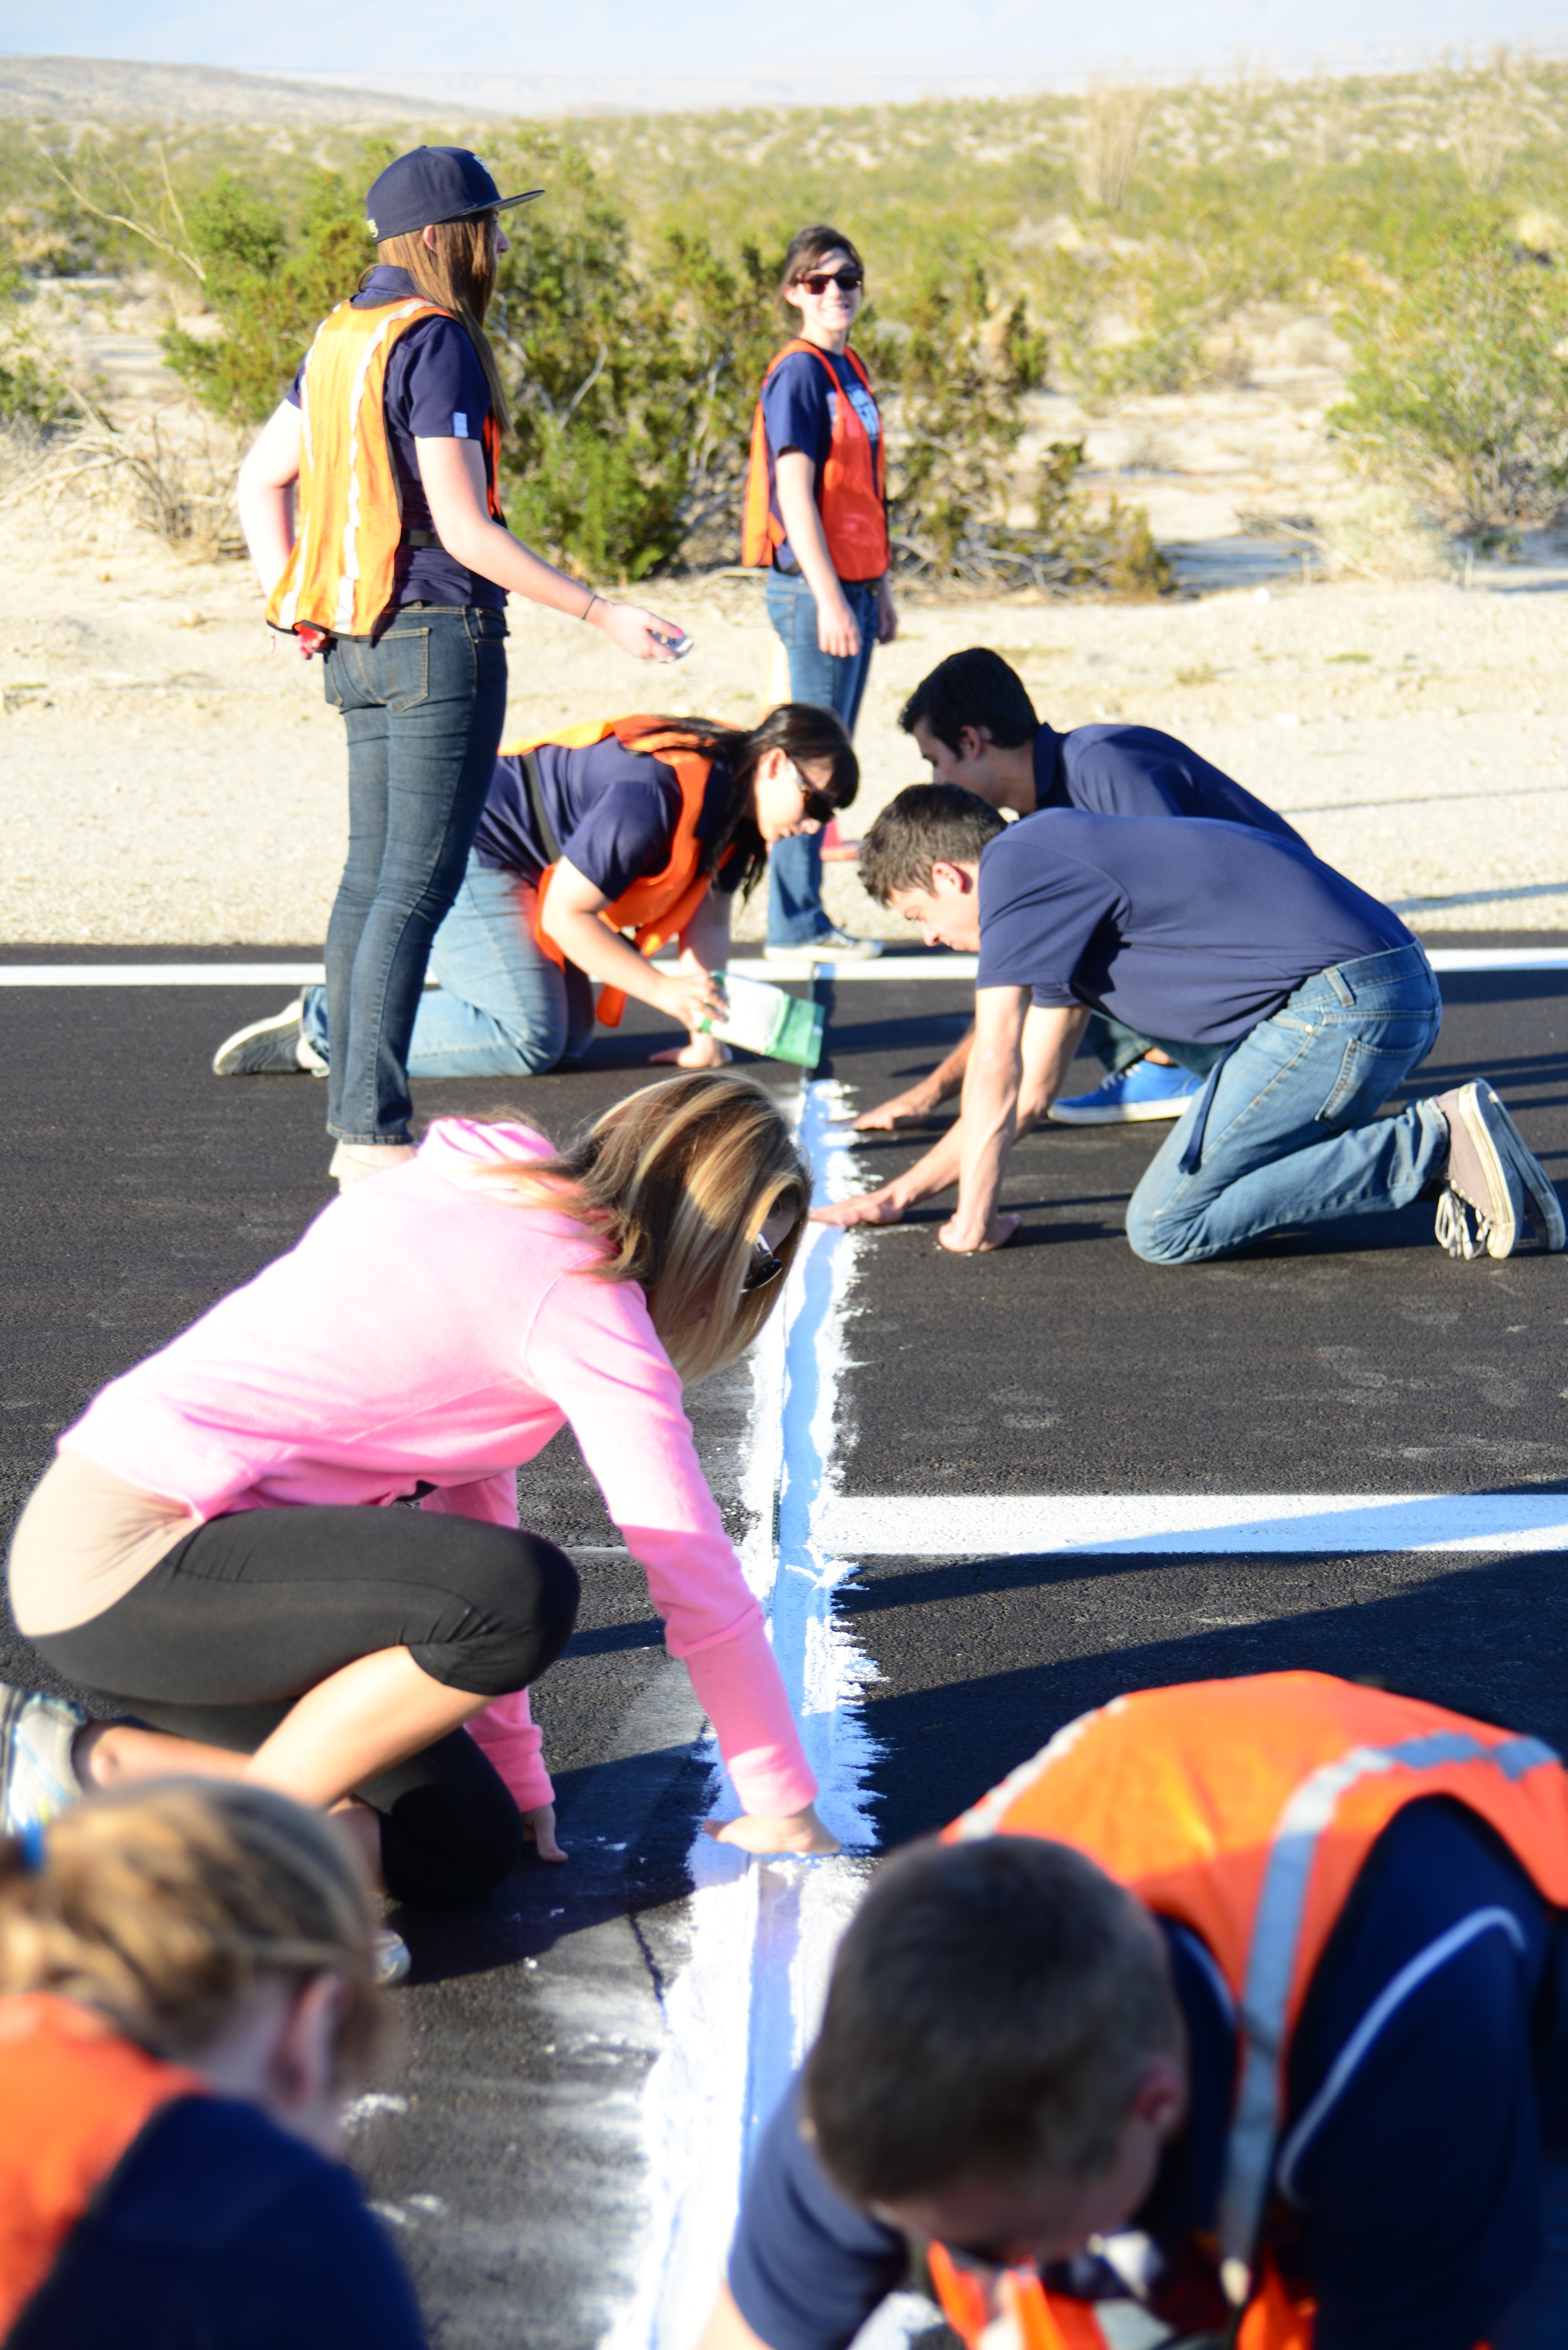   San Diego Christian College pilots marking the runway at Borrego Air Park for Spot Landing practice 2018  